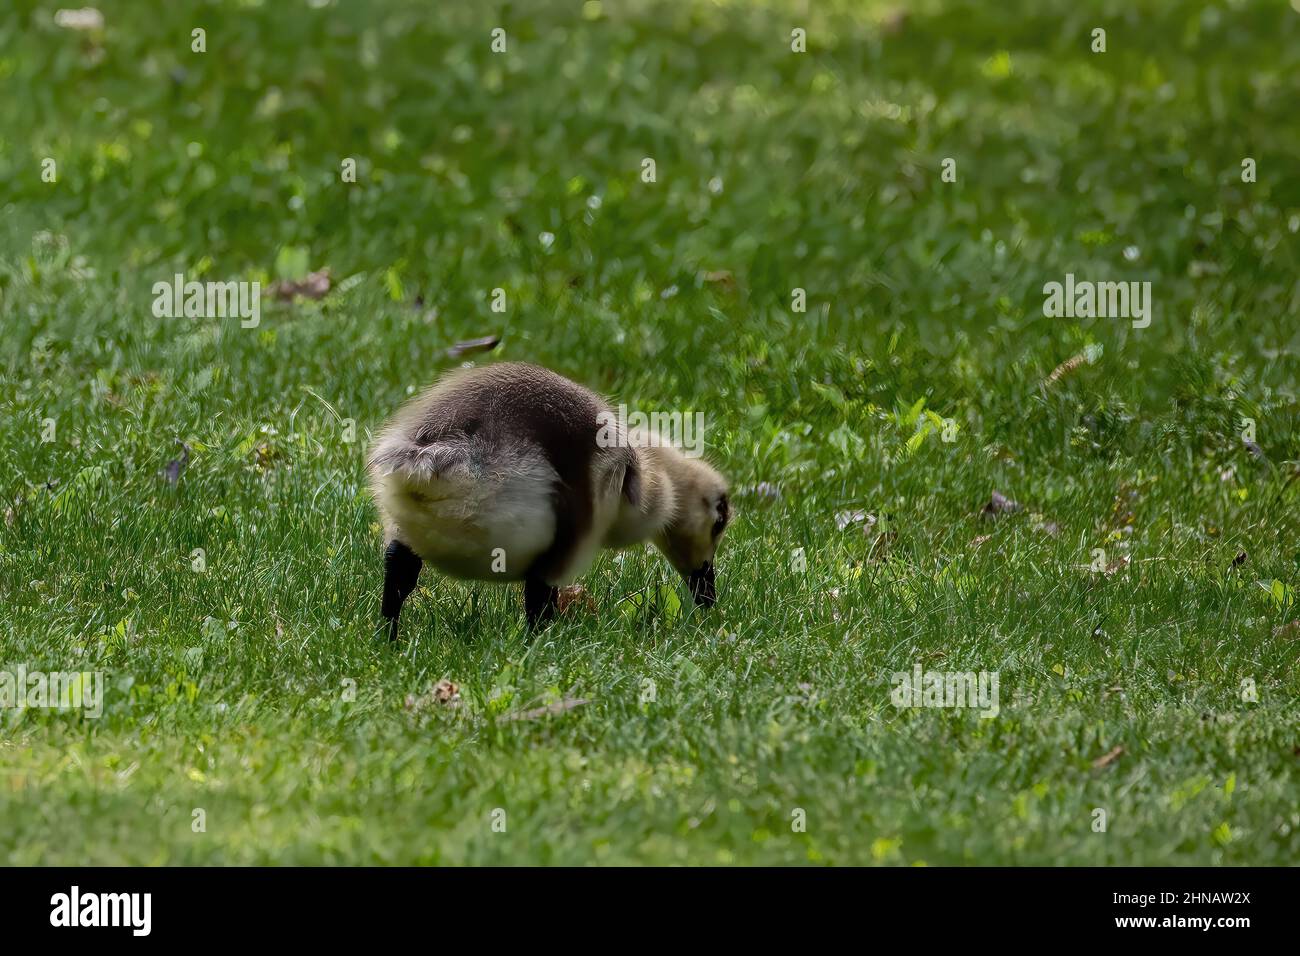 Baby gosling eating in the grass near Jerusalem Pond. Stock Photo